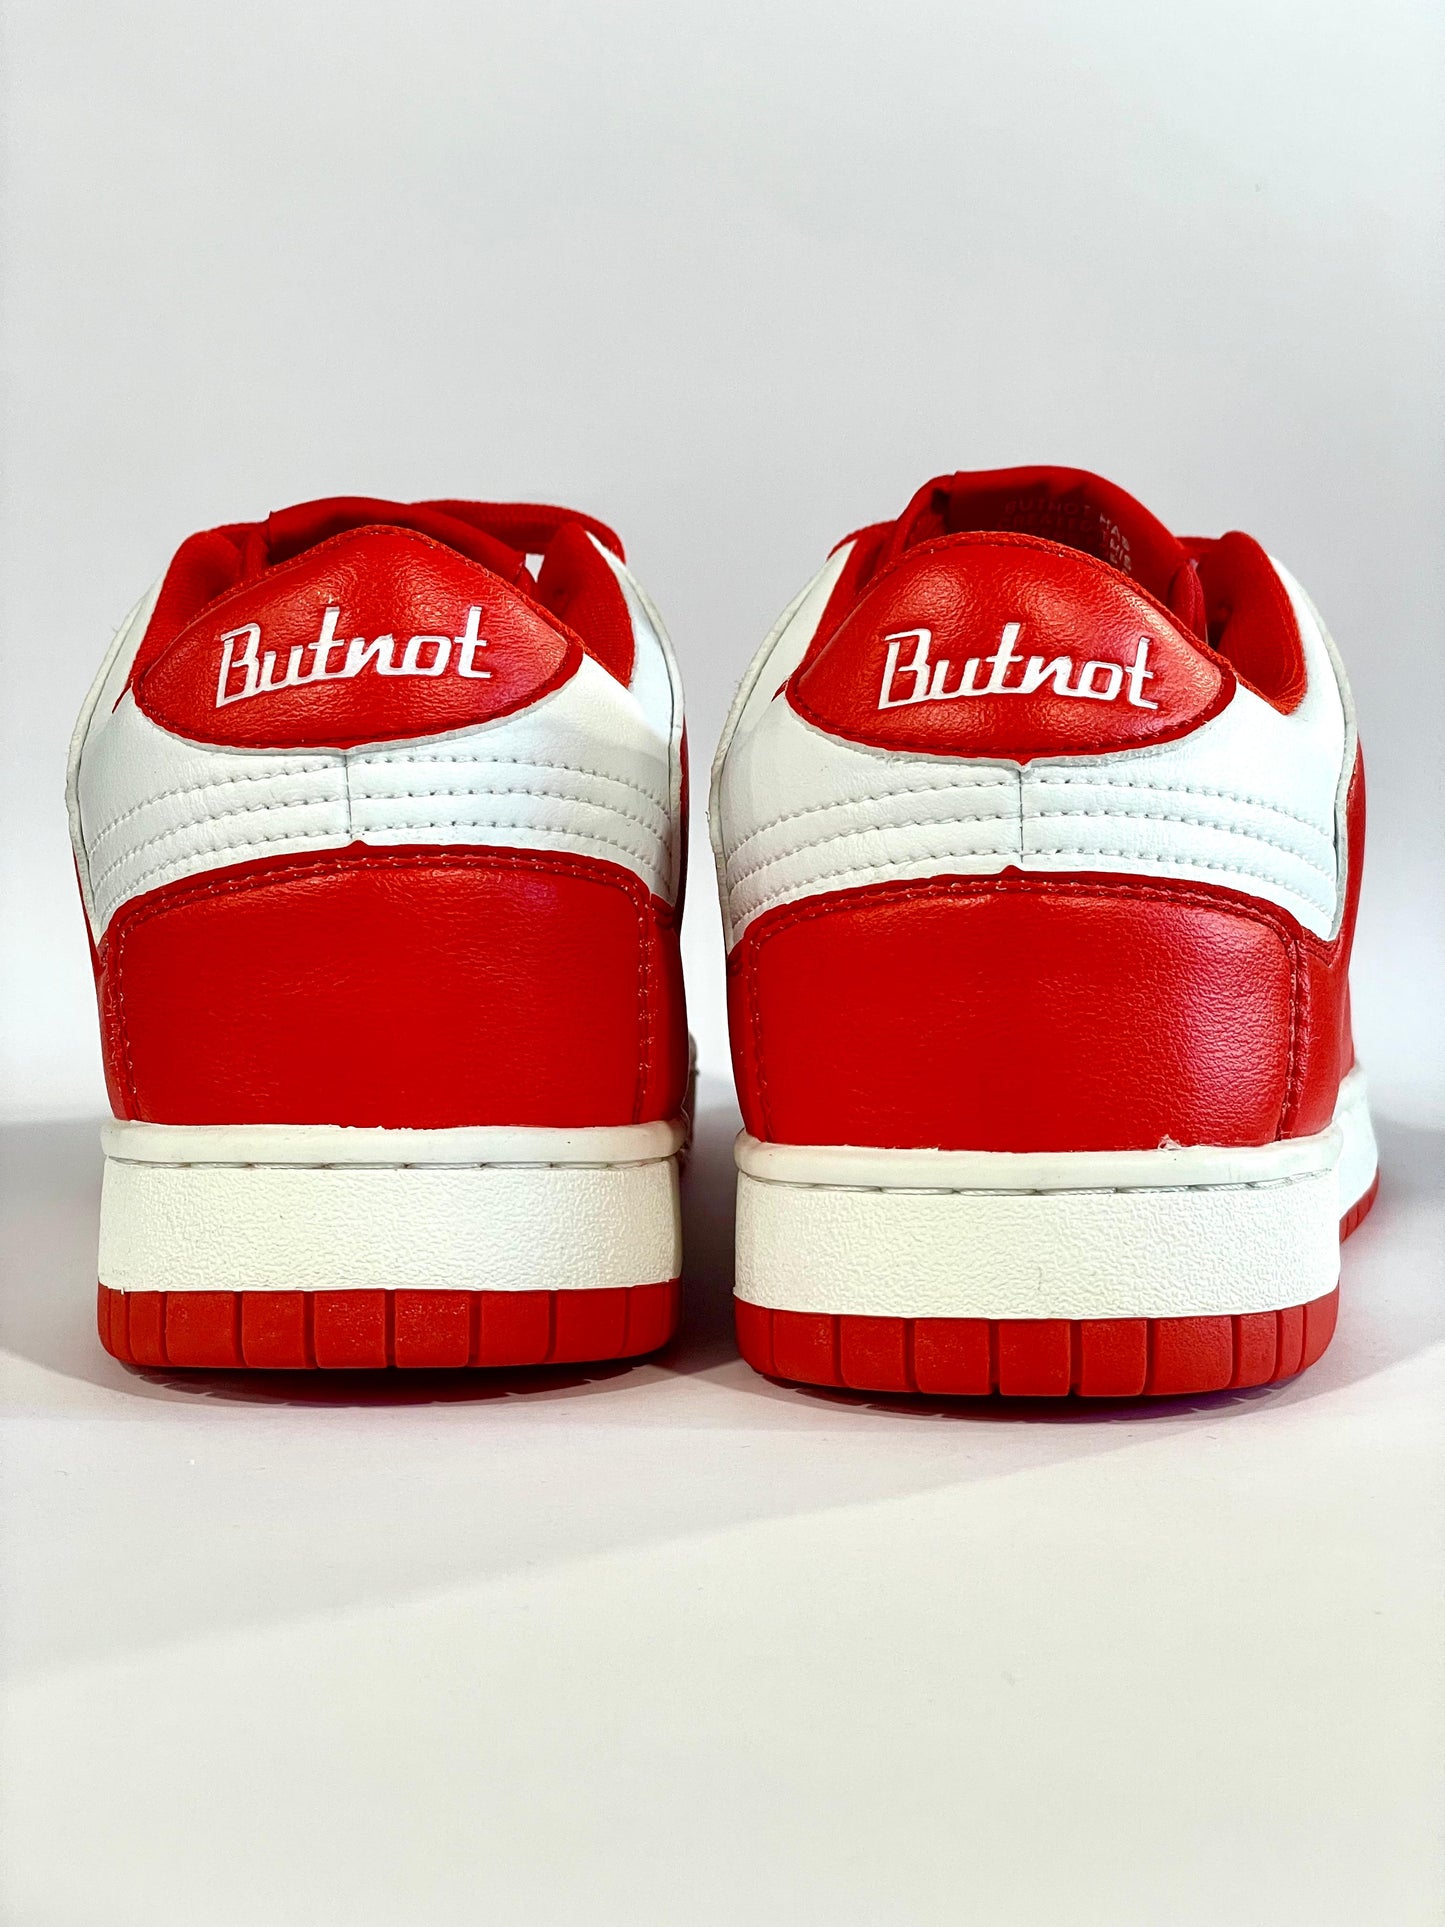 SNEAKERS "SPIN 900" - RED - BUTNOT - Blue Denim